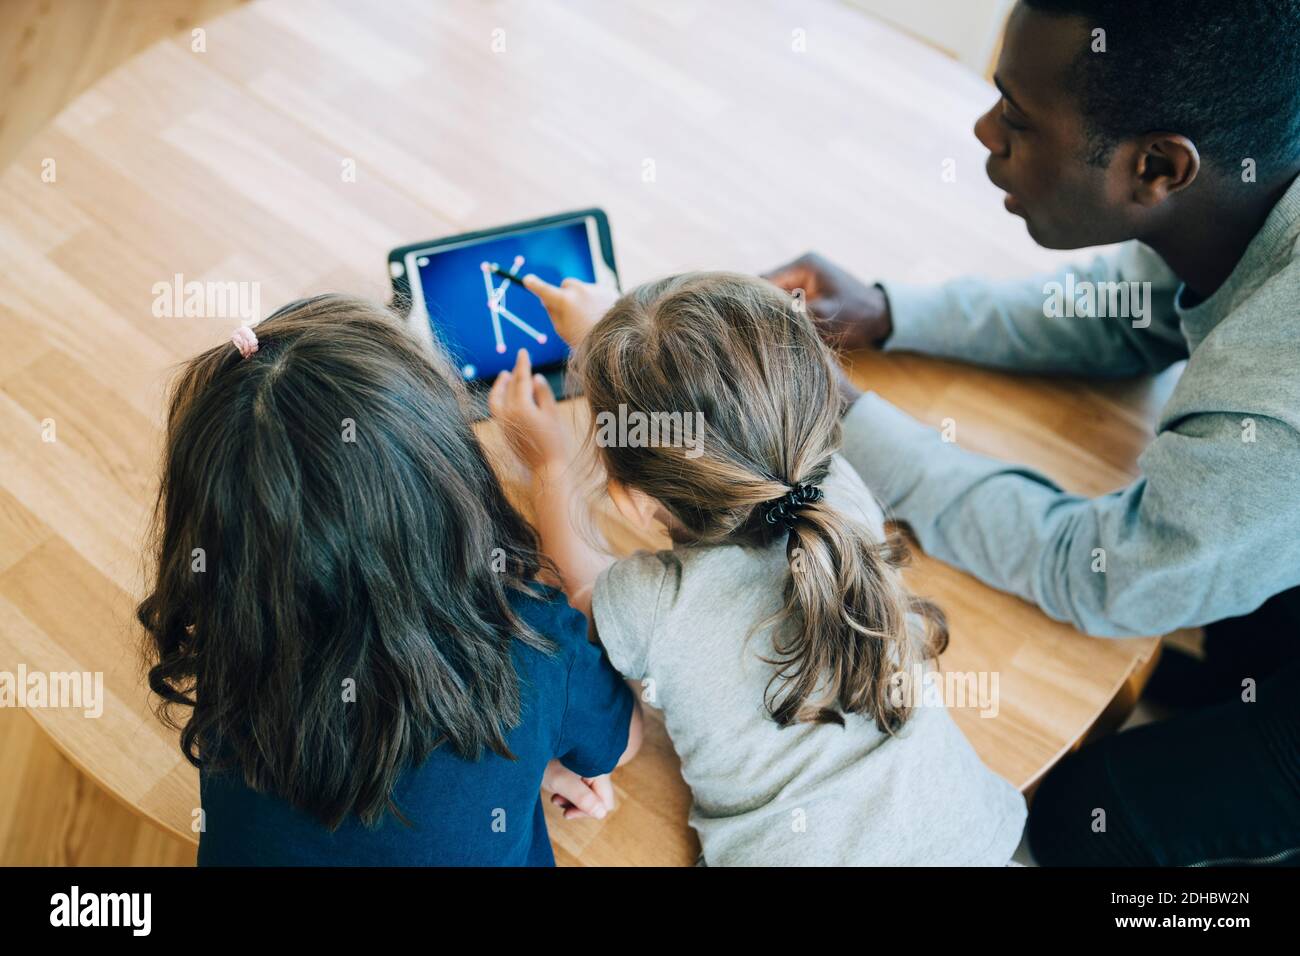 High angle view of girl touching letter K on digital tablet amidst friend and teacher at table in classroom Stock Photo